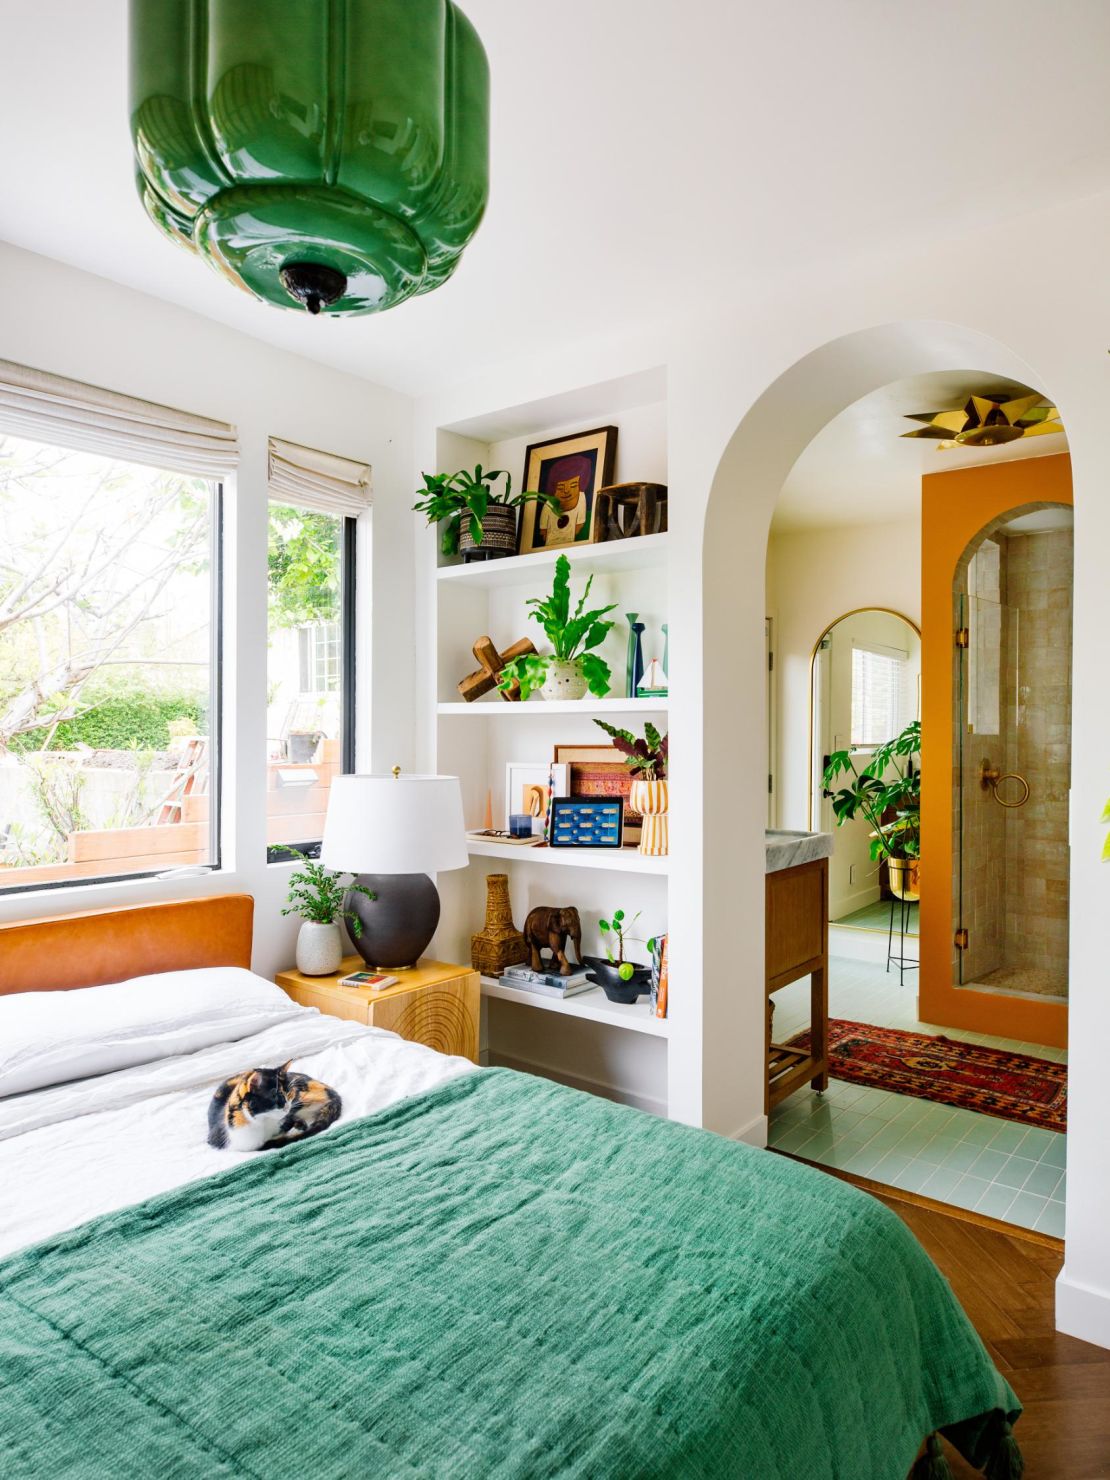 Green tones and plants can bring the outdoors inside.